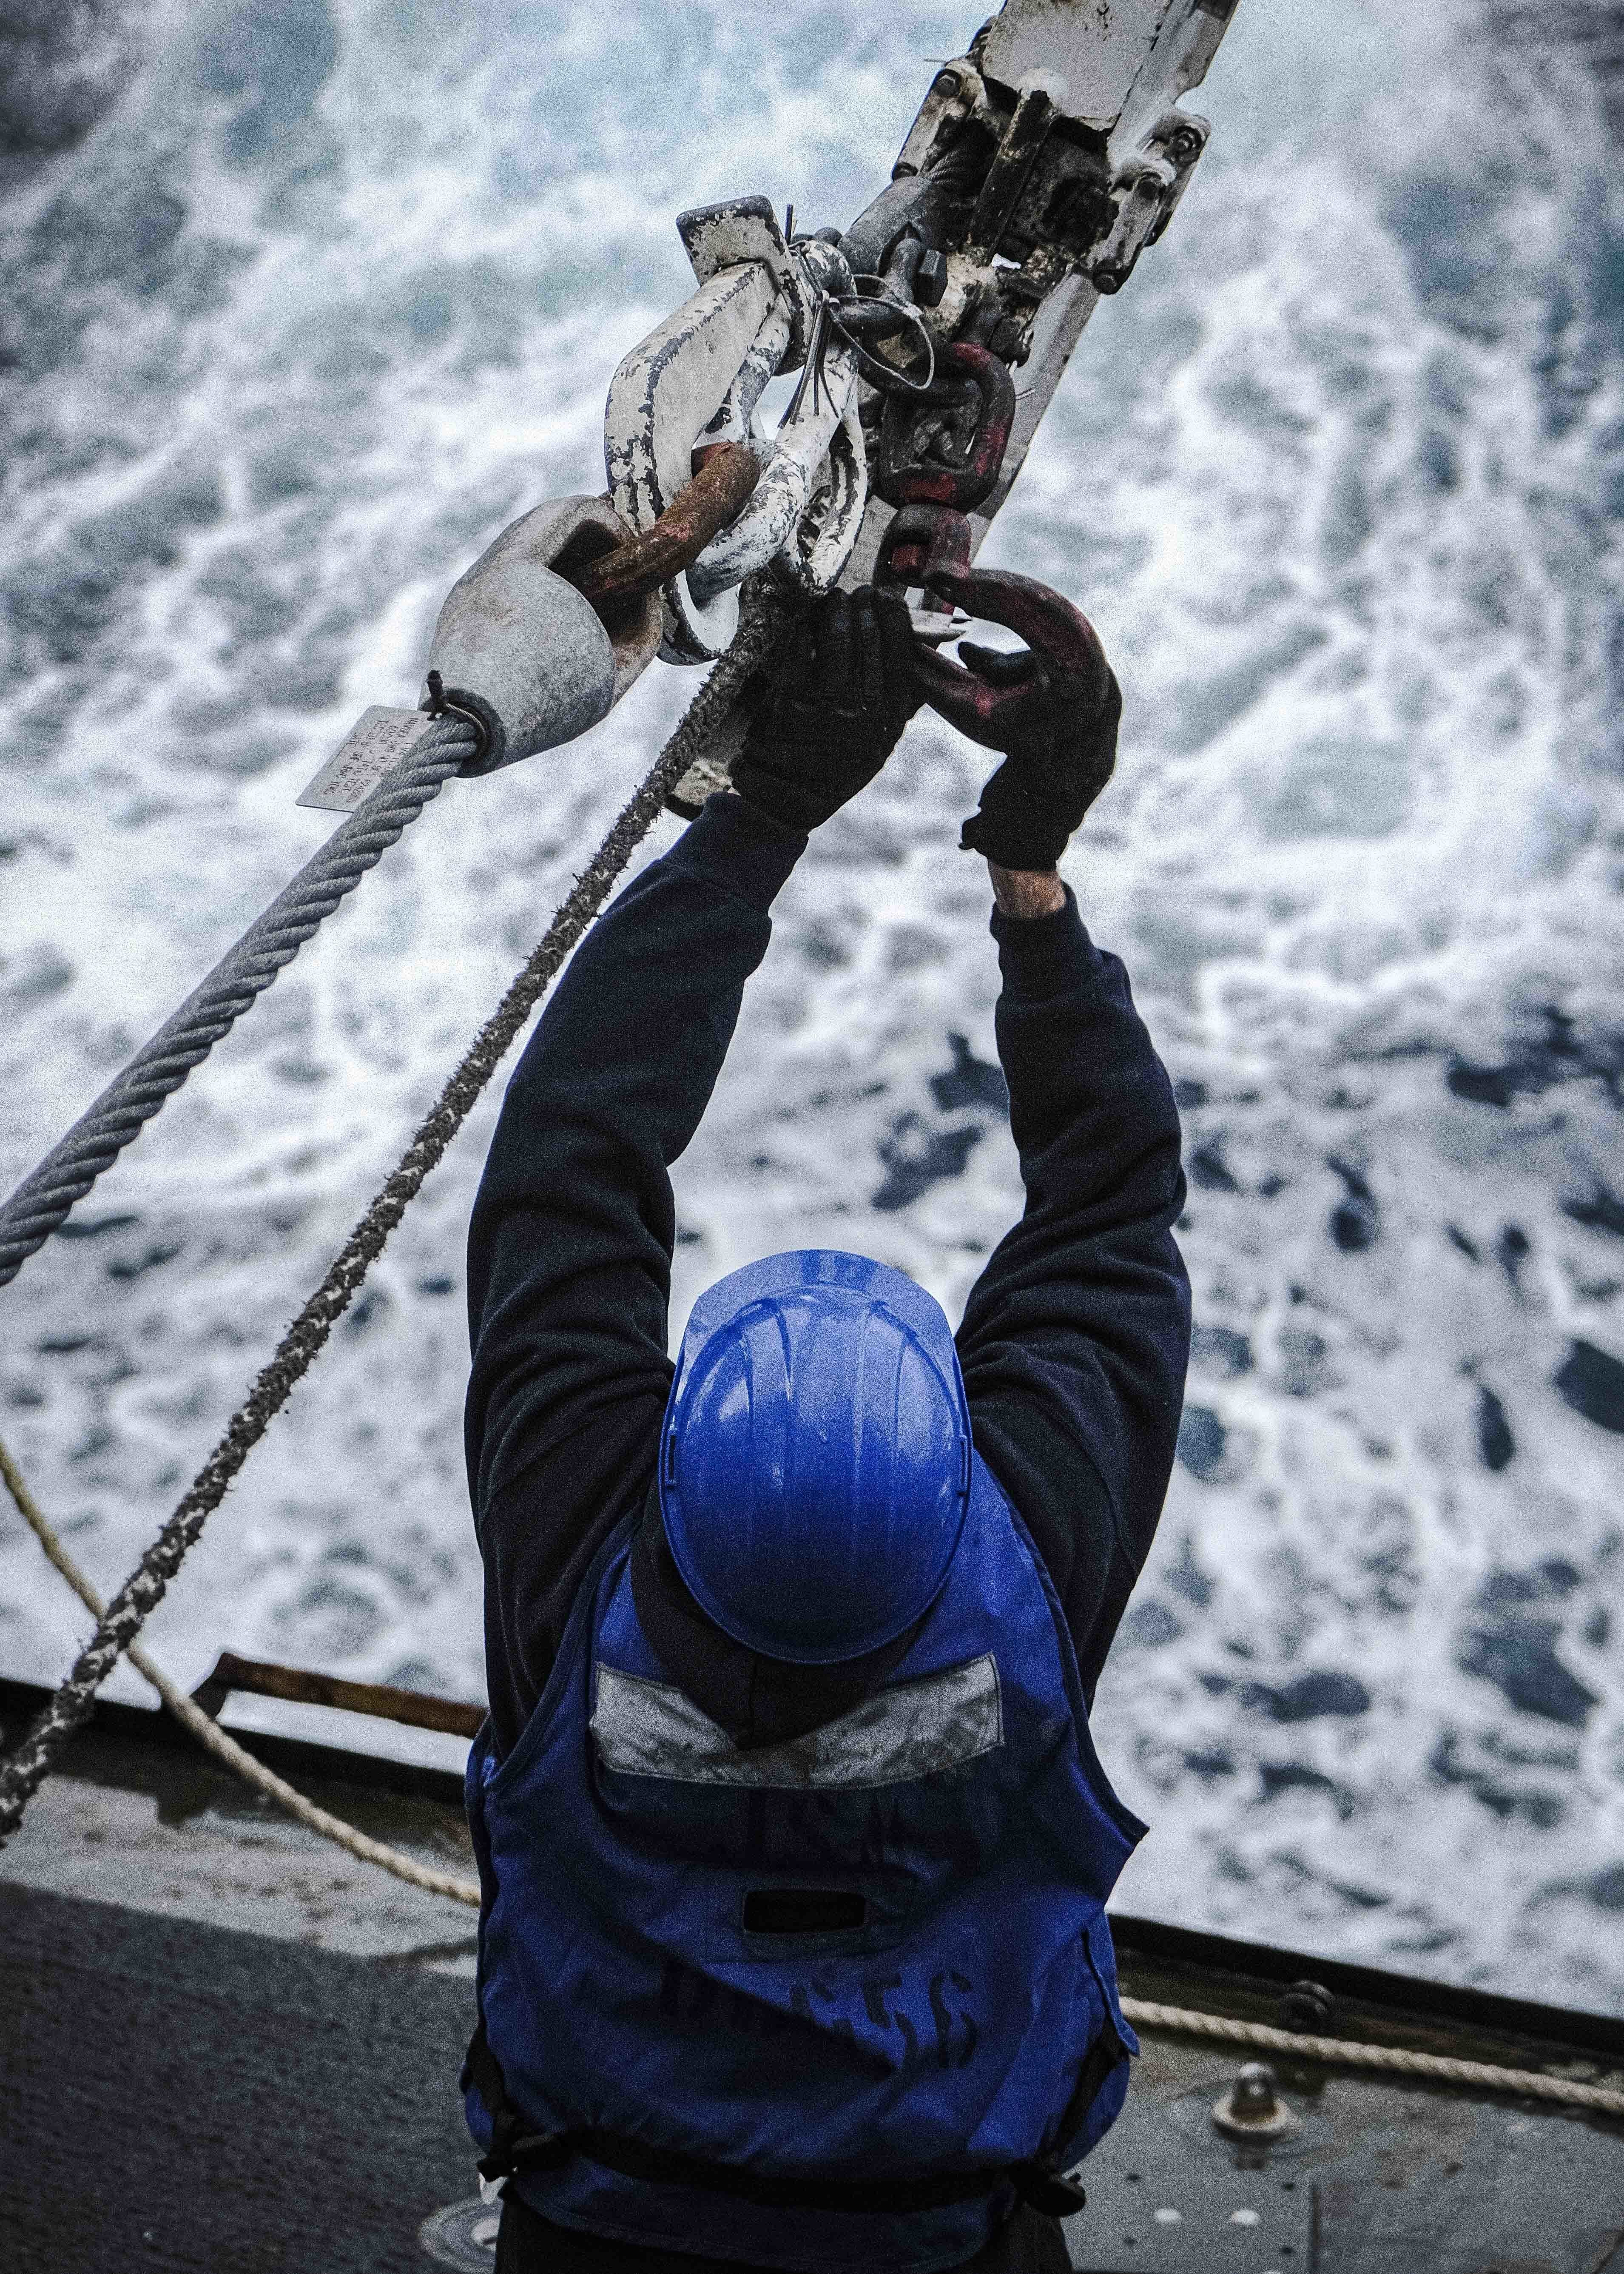 Logistics Specialist 3rd Class Tanner Martin, from Bakersfield, Calif., detaches a traveling surf hook aboard the Arleigh Burke-class guided-missile destroyer USS John S. McCain (DDG 56) during a replenishment-at-sea with the Lewis and Clark-class dry cargo and ammunition ship USNS Charles Drew (T-AKE 10).